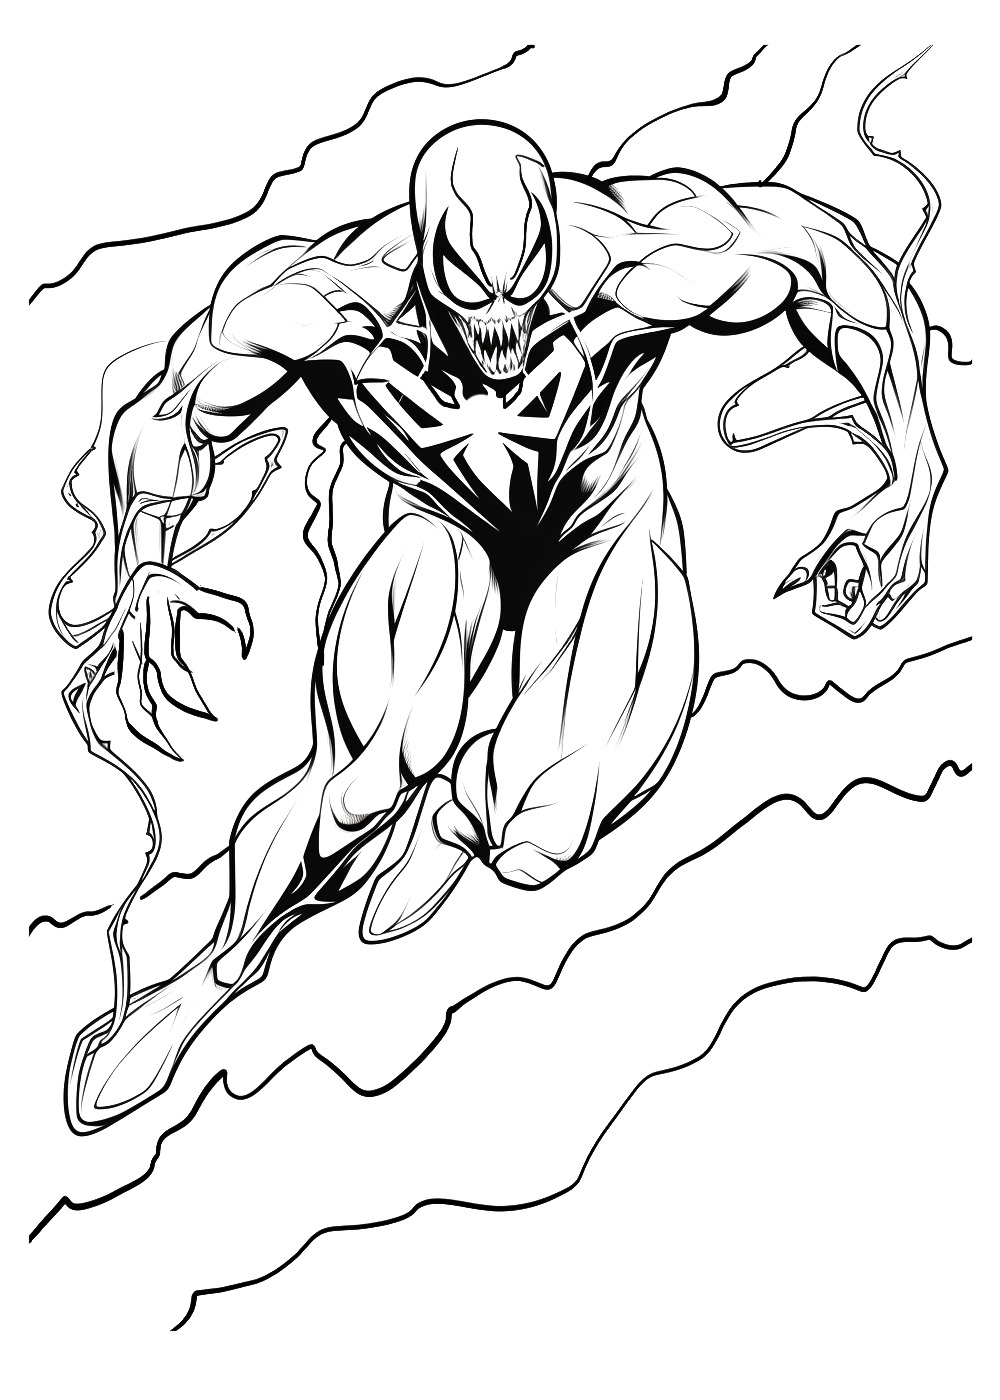 Venom coloring pages by coloringpageswk on